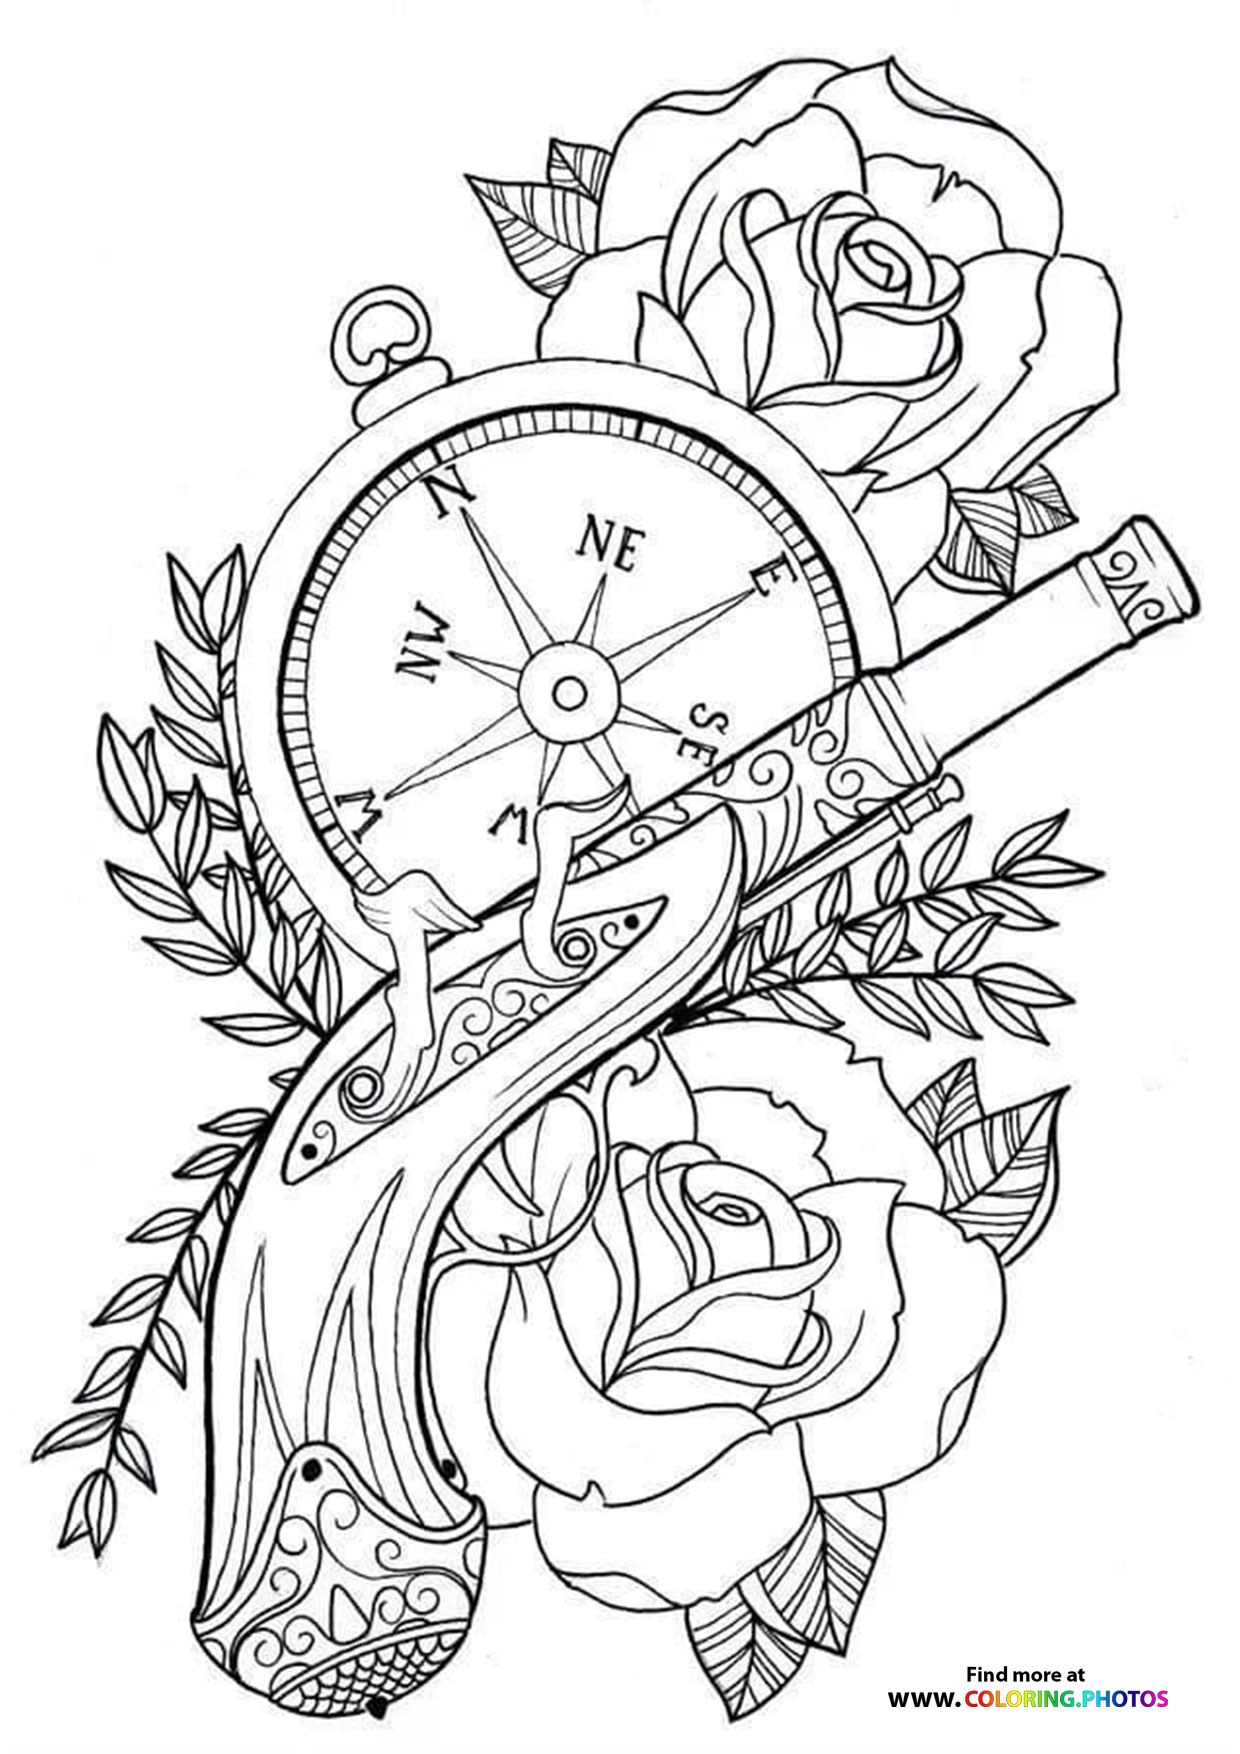 Guns and roses - Coloring Pages for kids